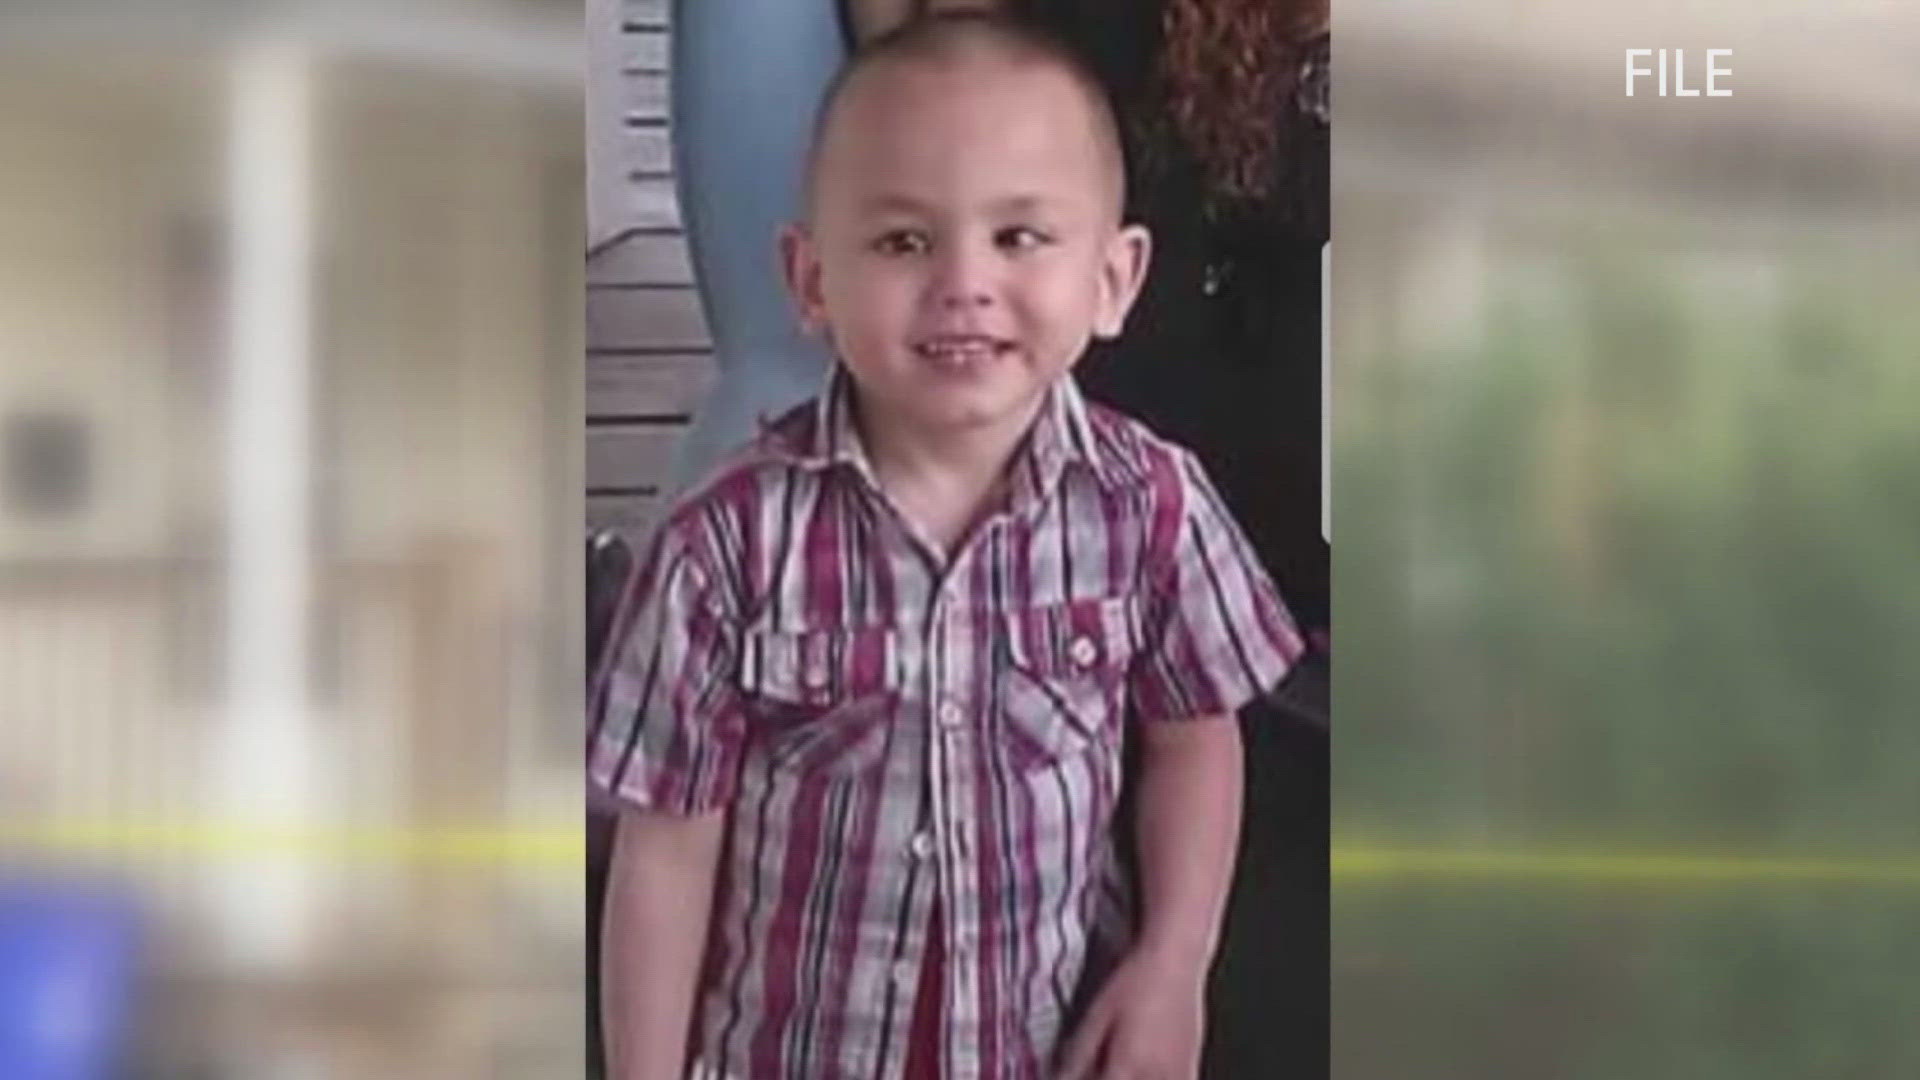 The case stems from the 2017 death of Jordan Rodriguez.  Rodriguez was a 4-year-old who was tragically found buried in his mom's backyard.